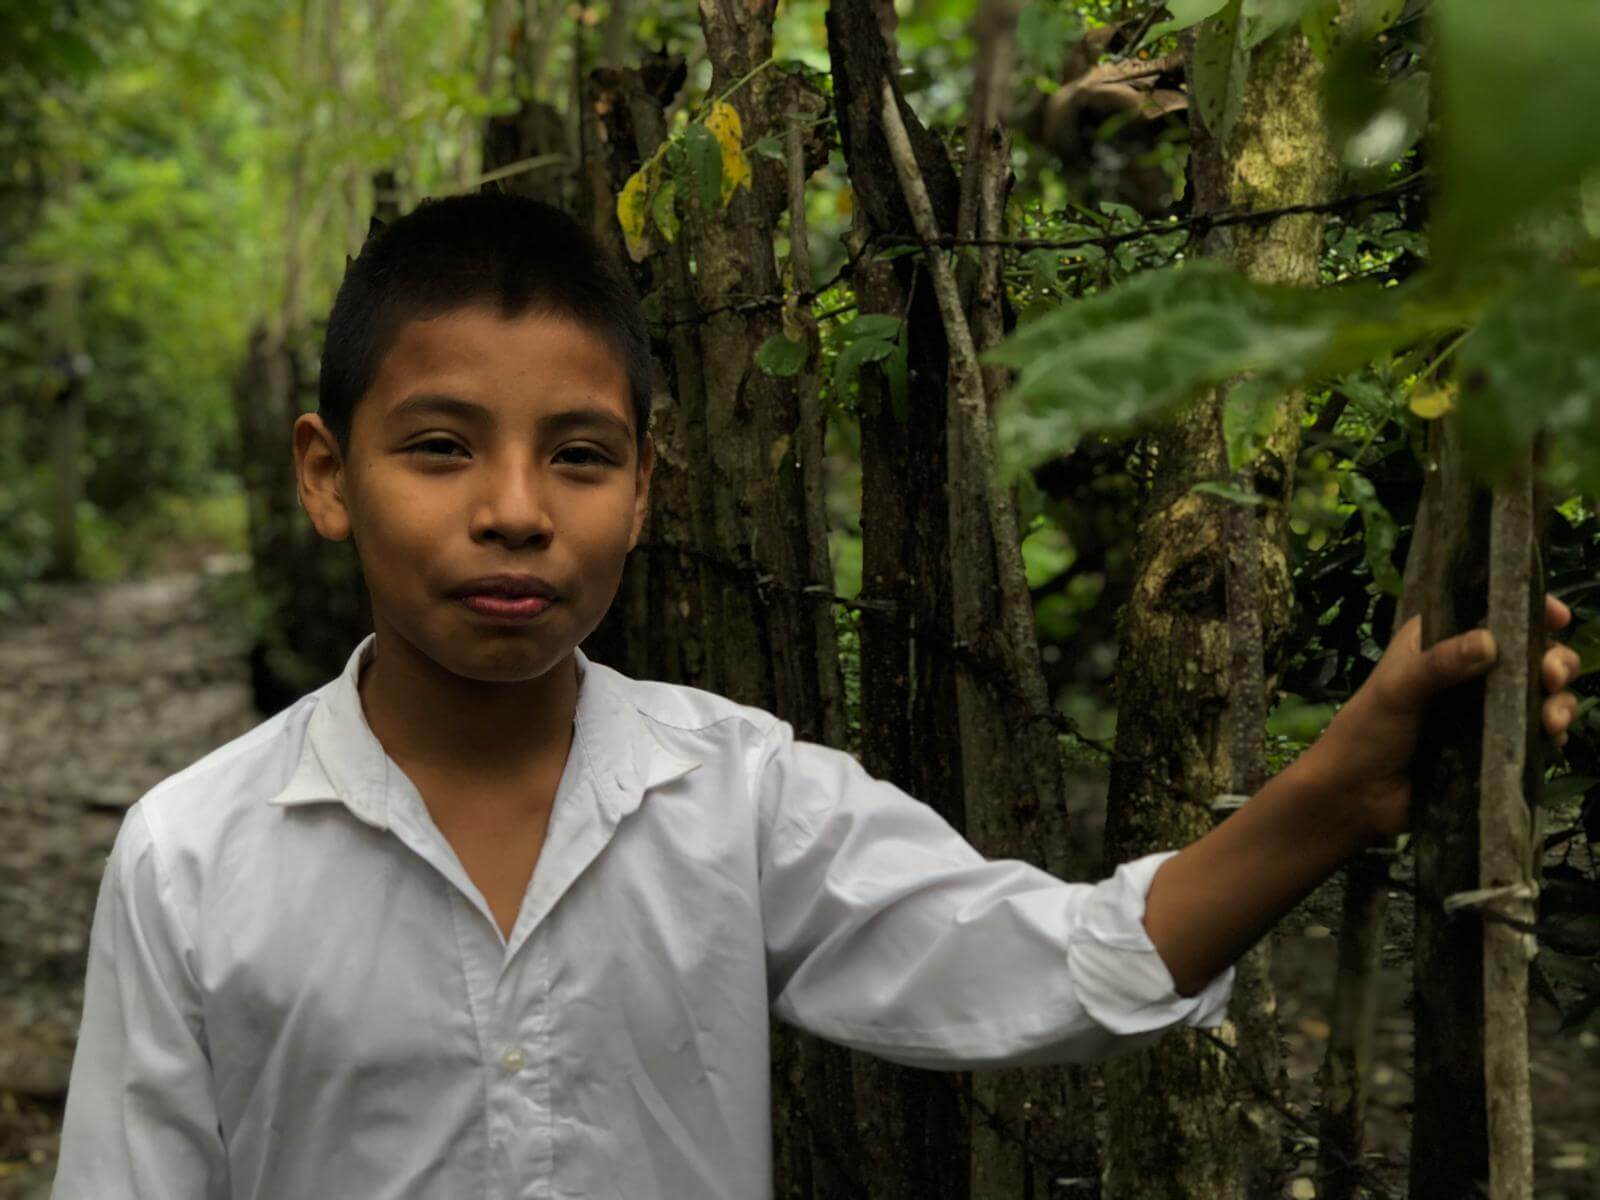 A young boy wearing a white shirt puts his hand on a fence. He is surrounded by nature.